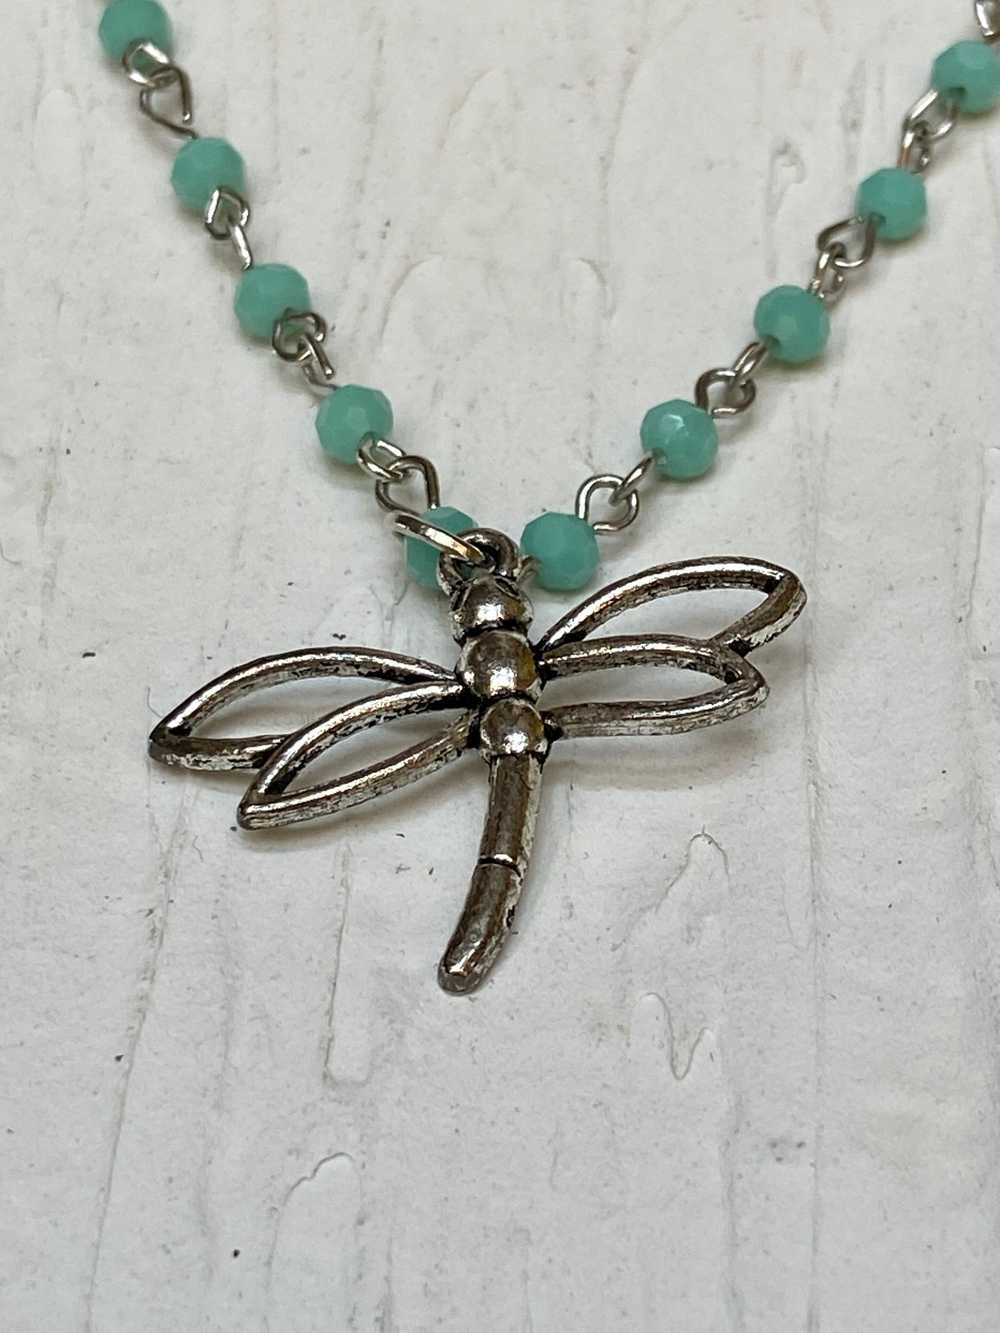 Dragonfly necklace - image 7